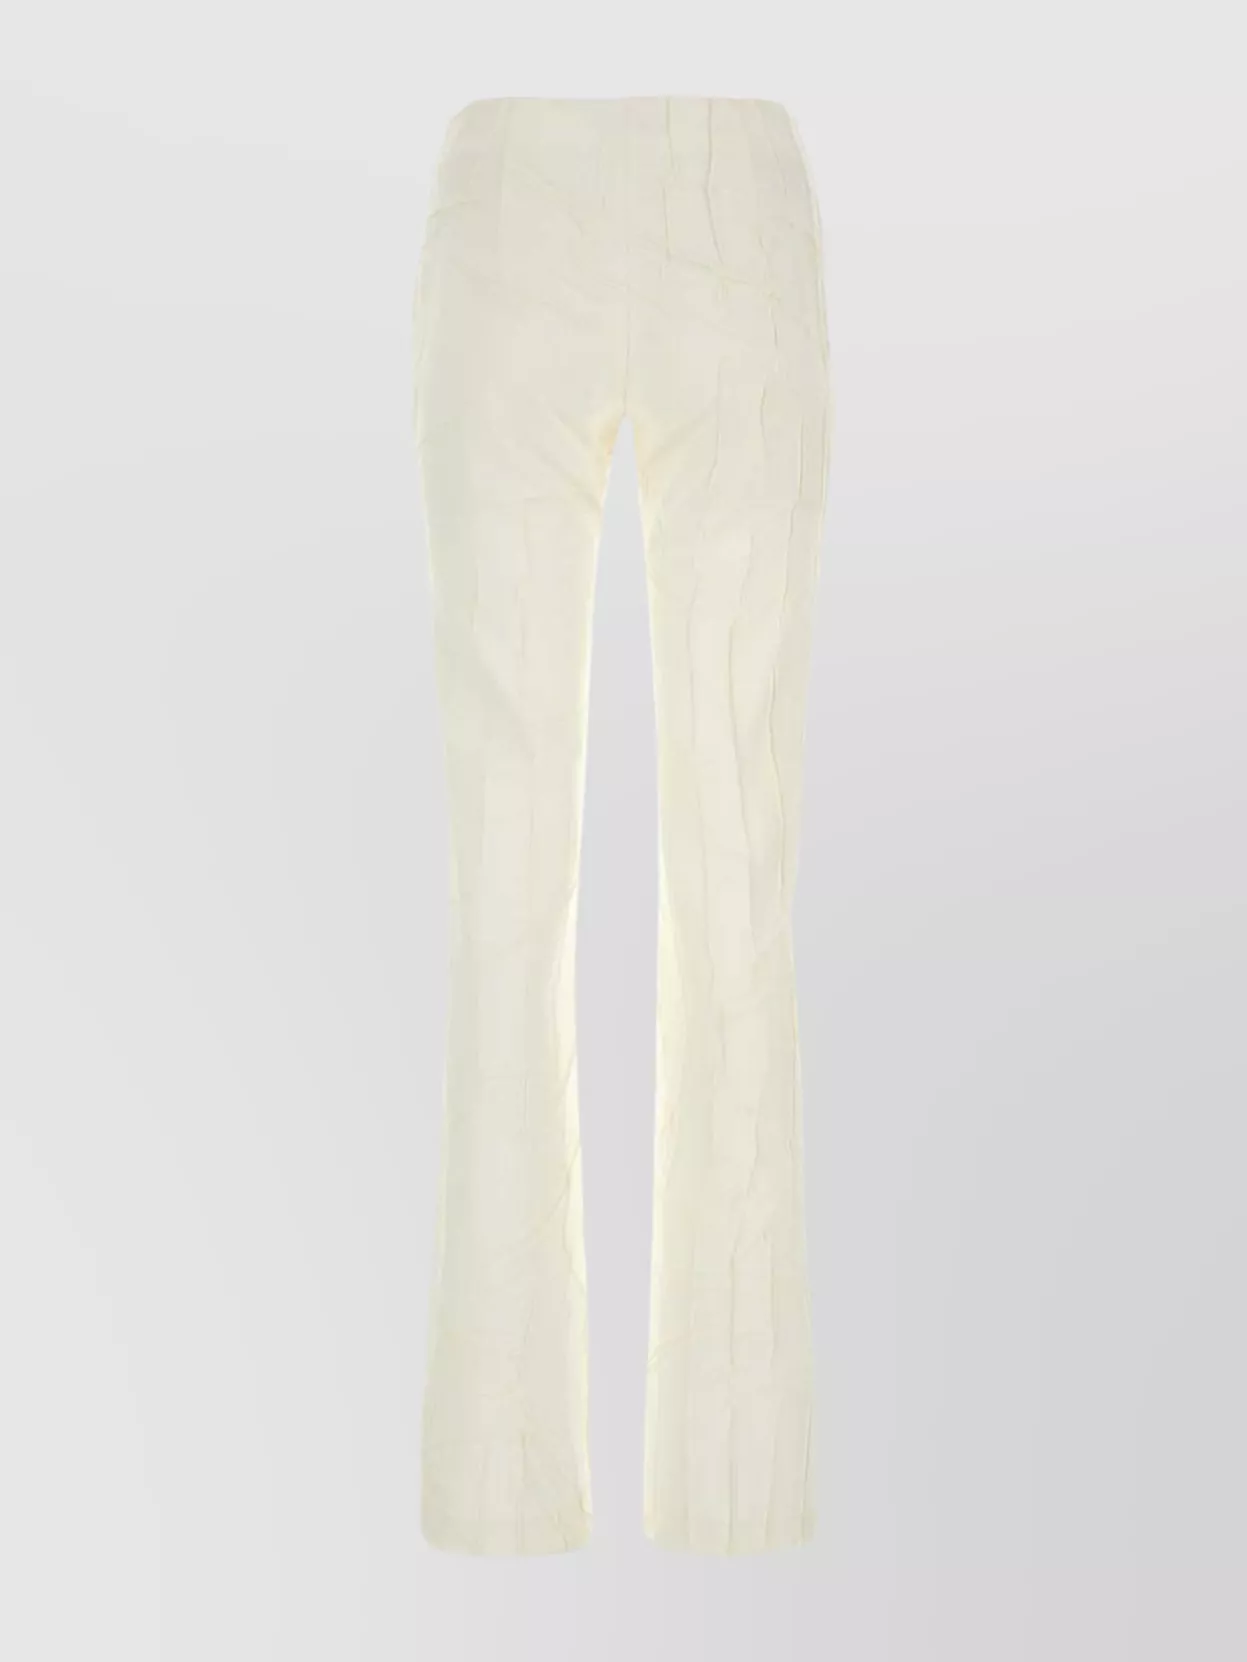 Shop Blumarine Textured Fabric Trousers With Back Pockets And Belt Loops